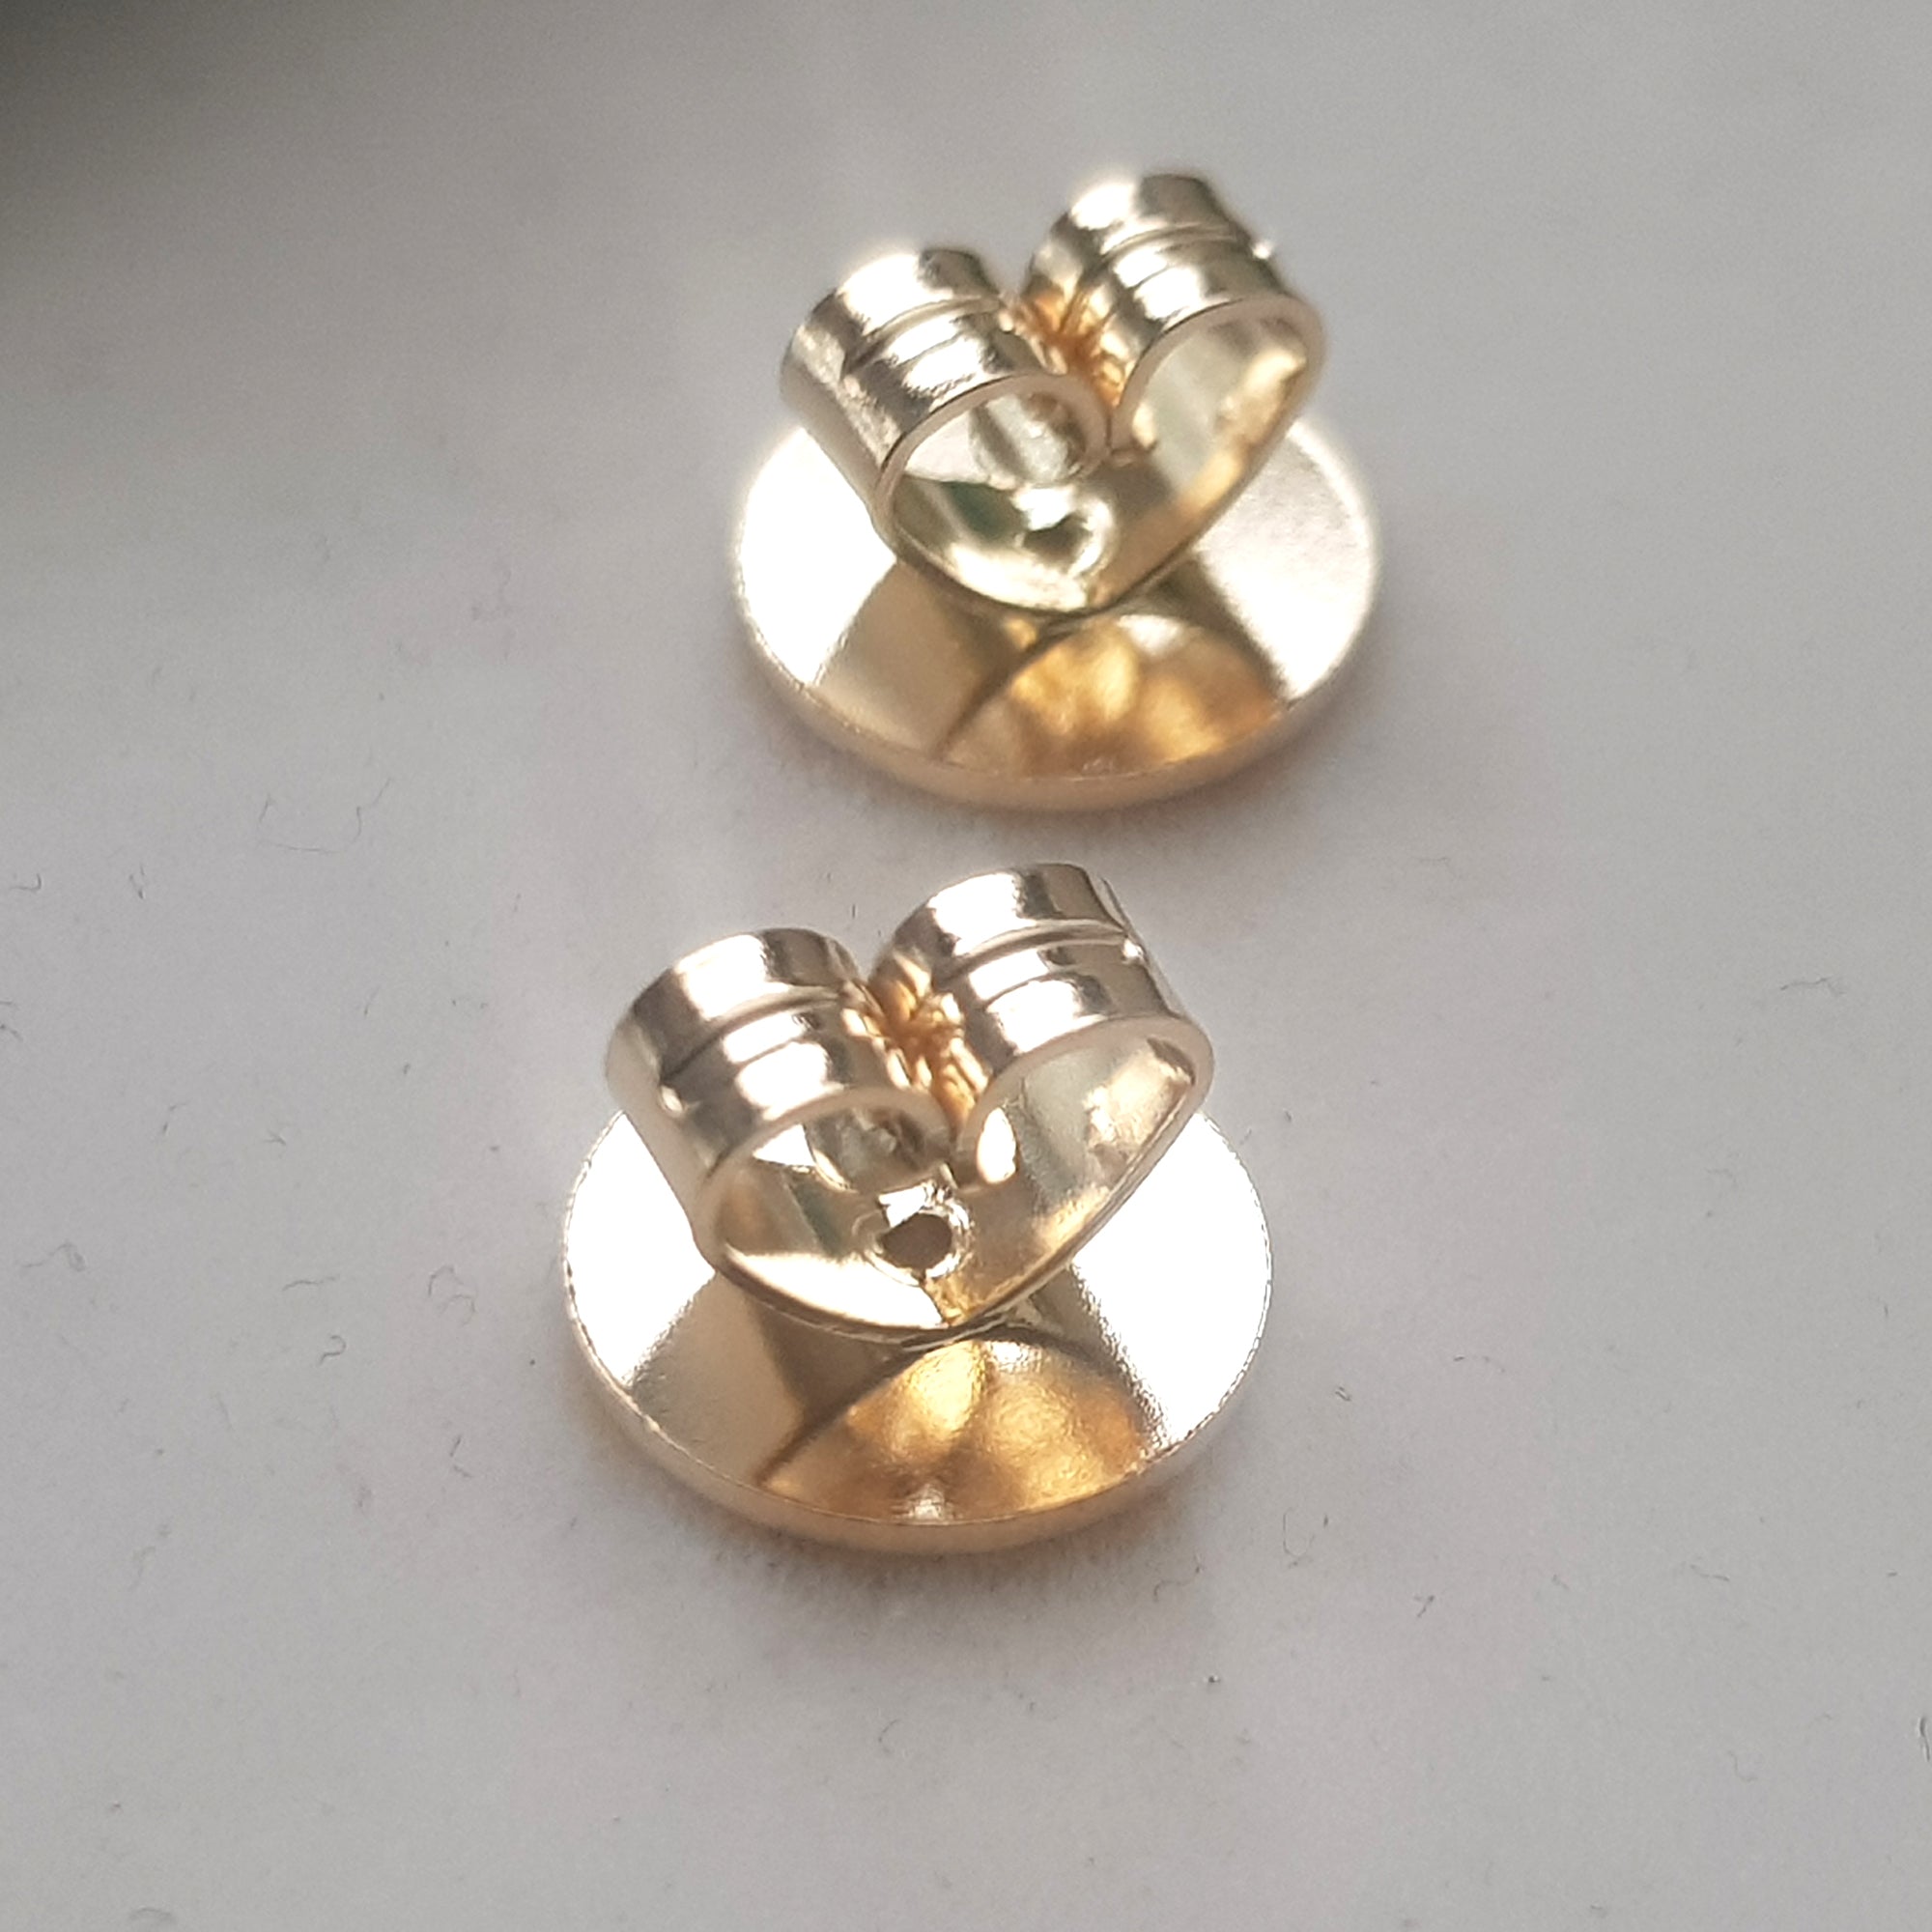 Buy Butterfly Back Earrings, Solid Gold Butterfly Backings, 10K 14K 18K,  6x4mm, Yellow Gold, White Gold, Rose Gold, Findings for Earrings Online in  India - Etsy